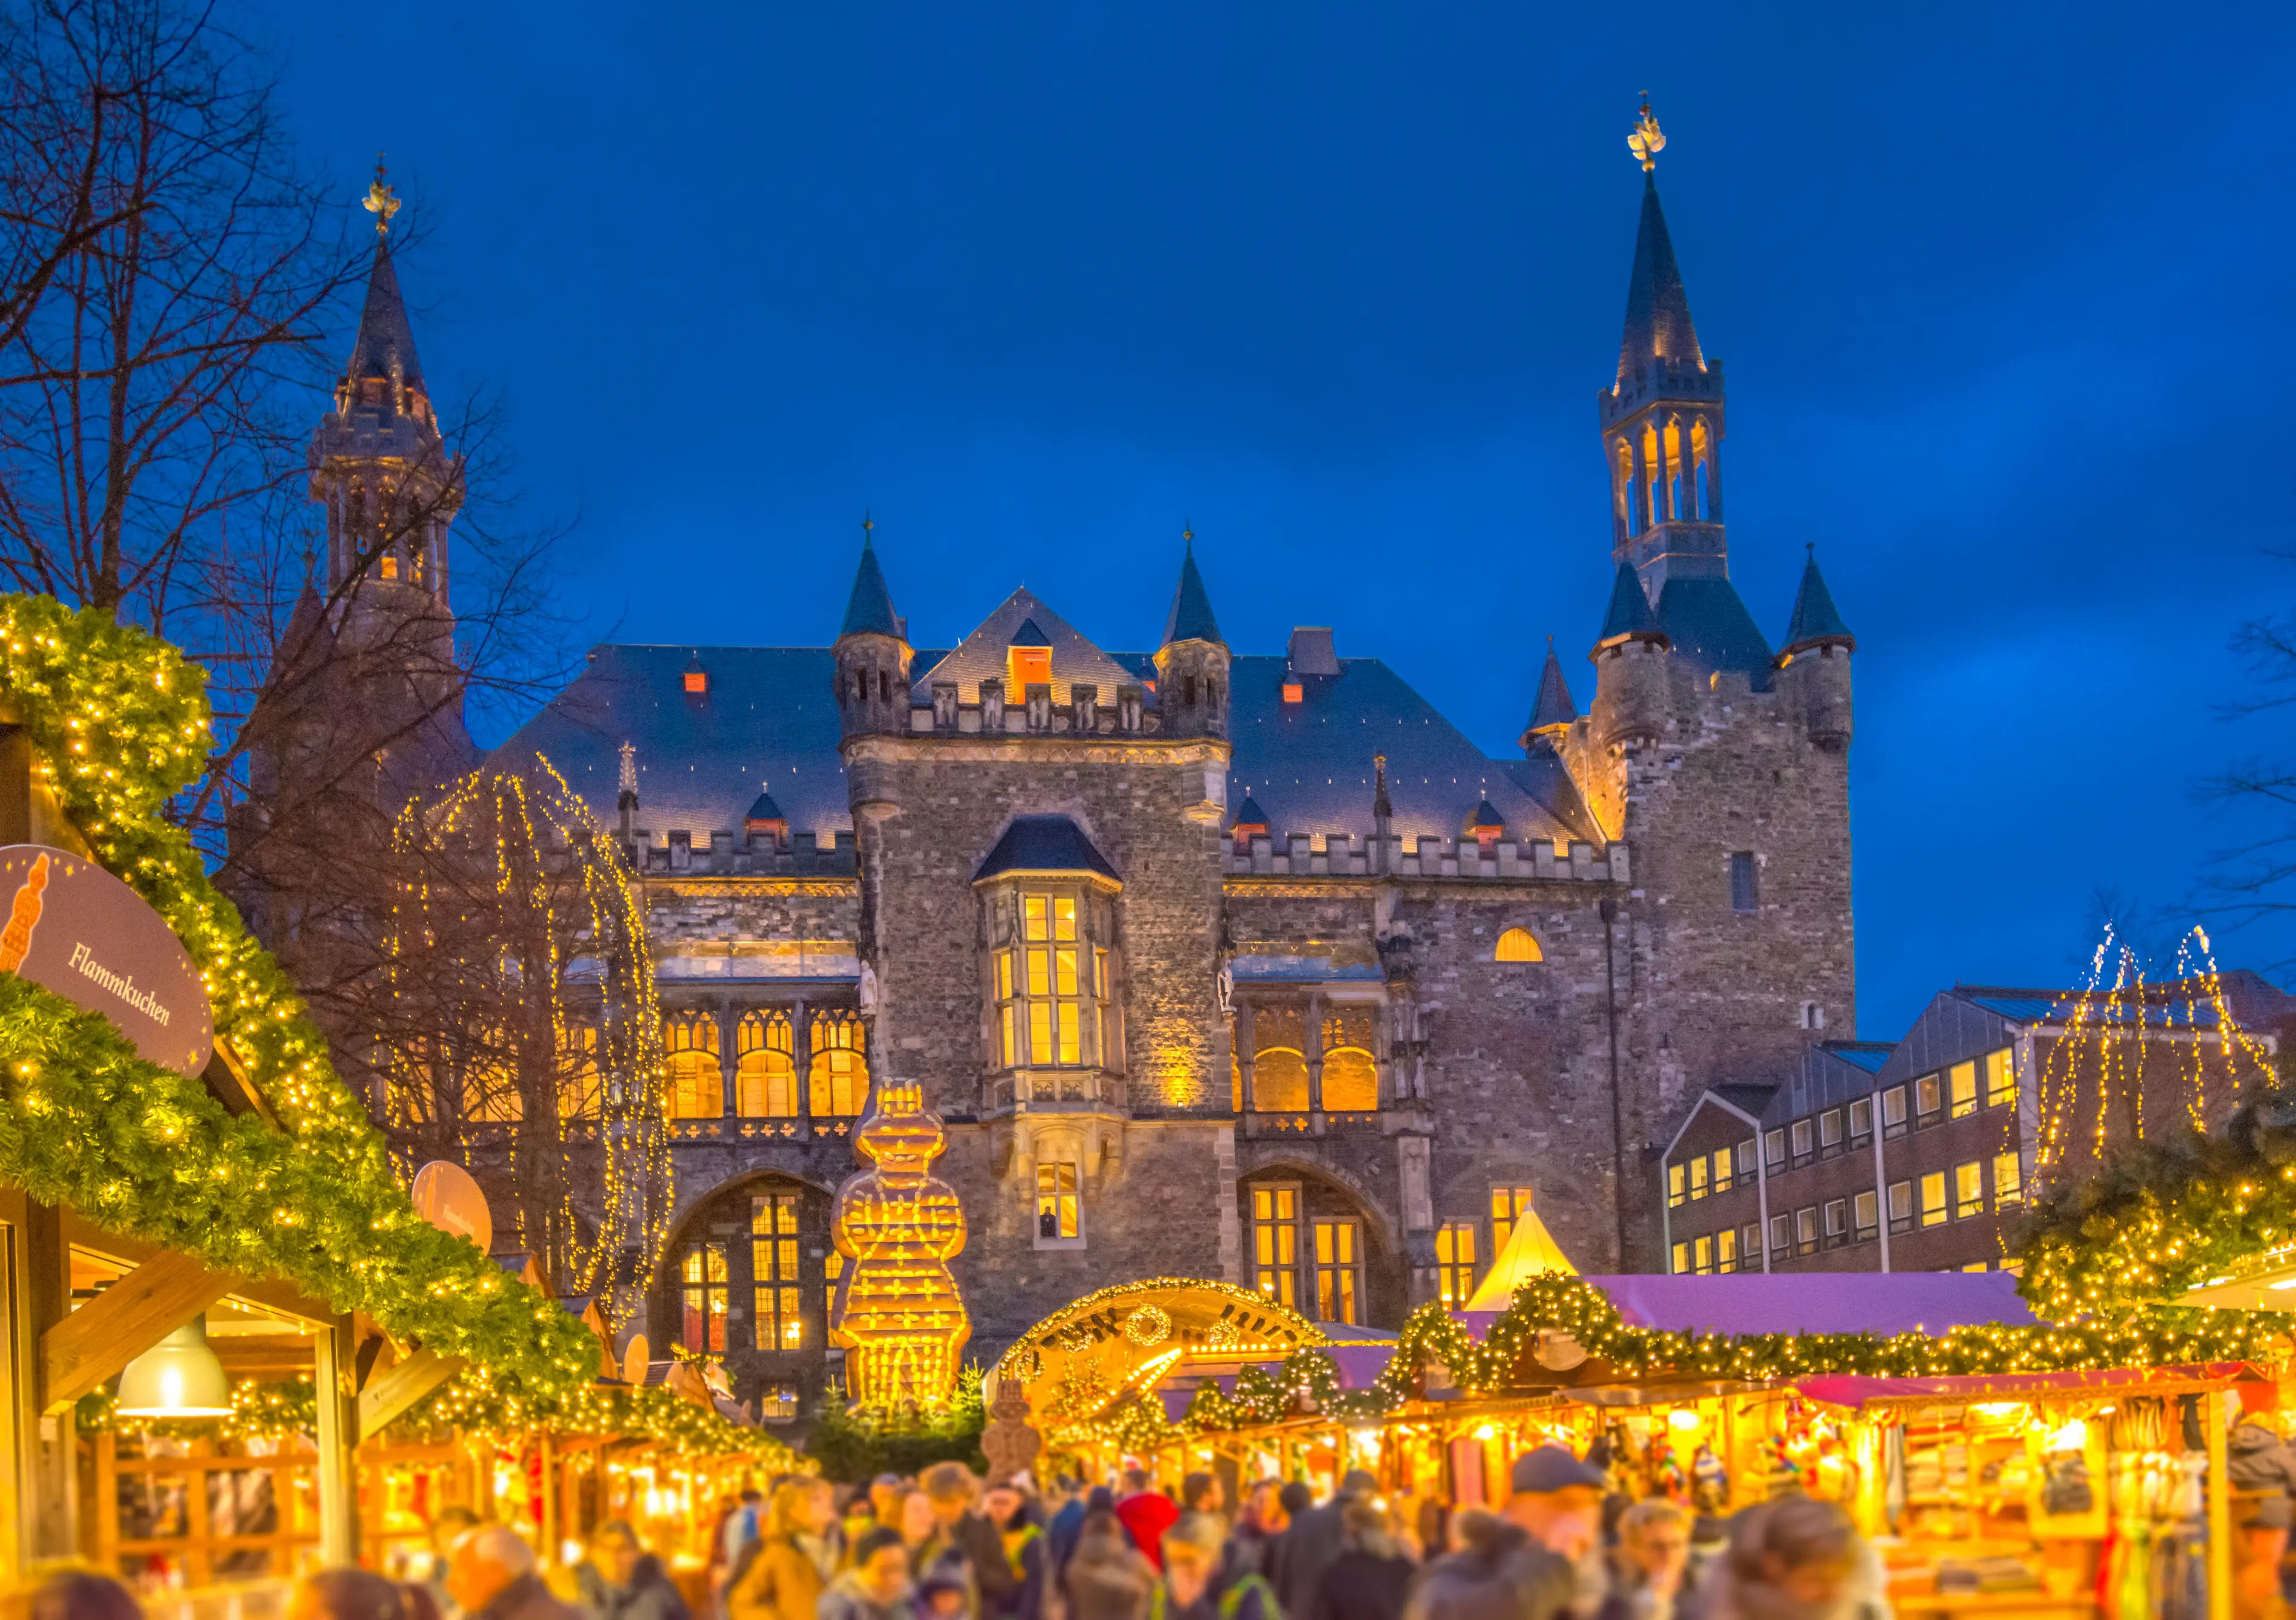 Aachen city hall and the annual Christmas Market during Blue Hour